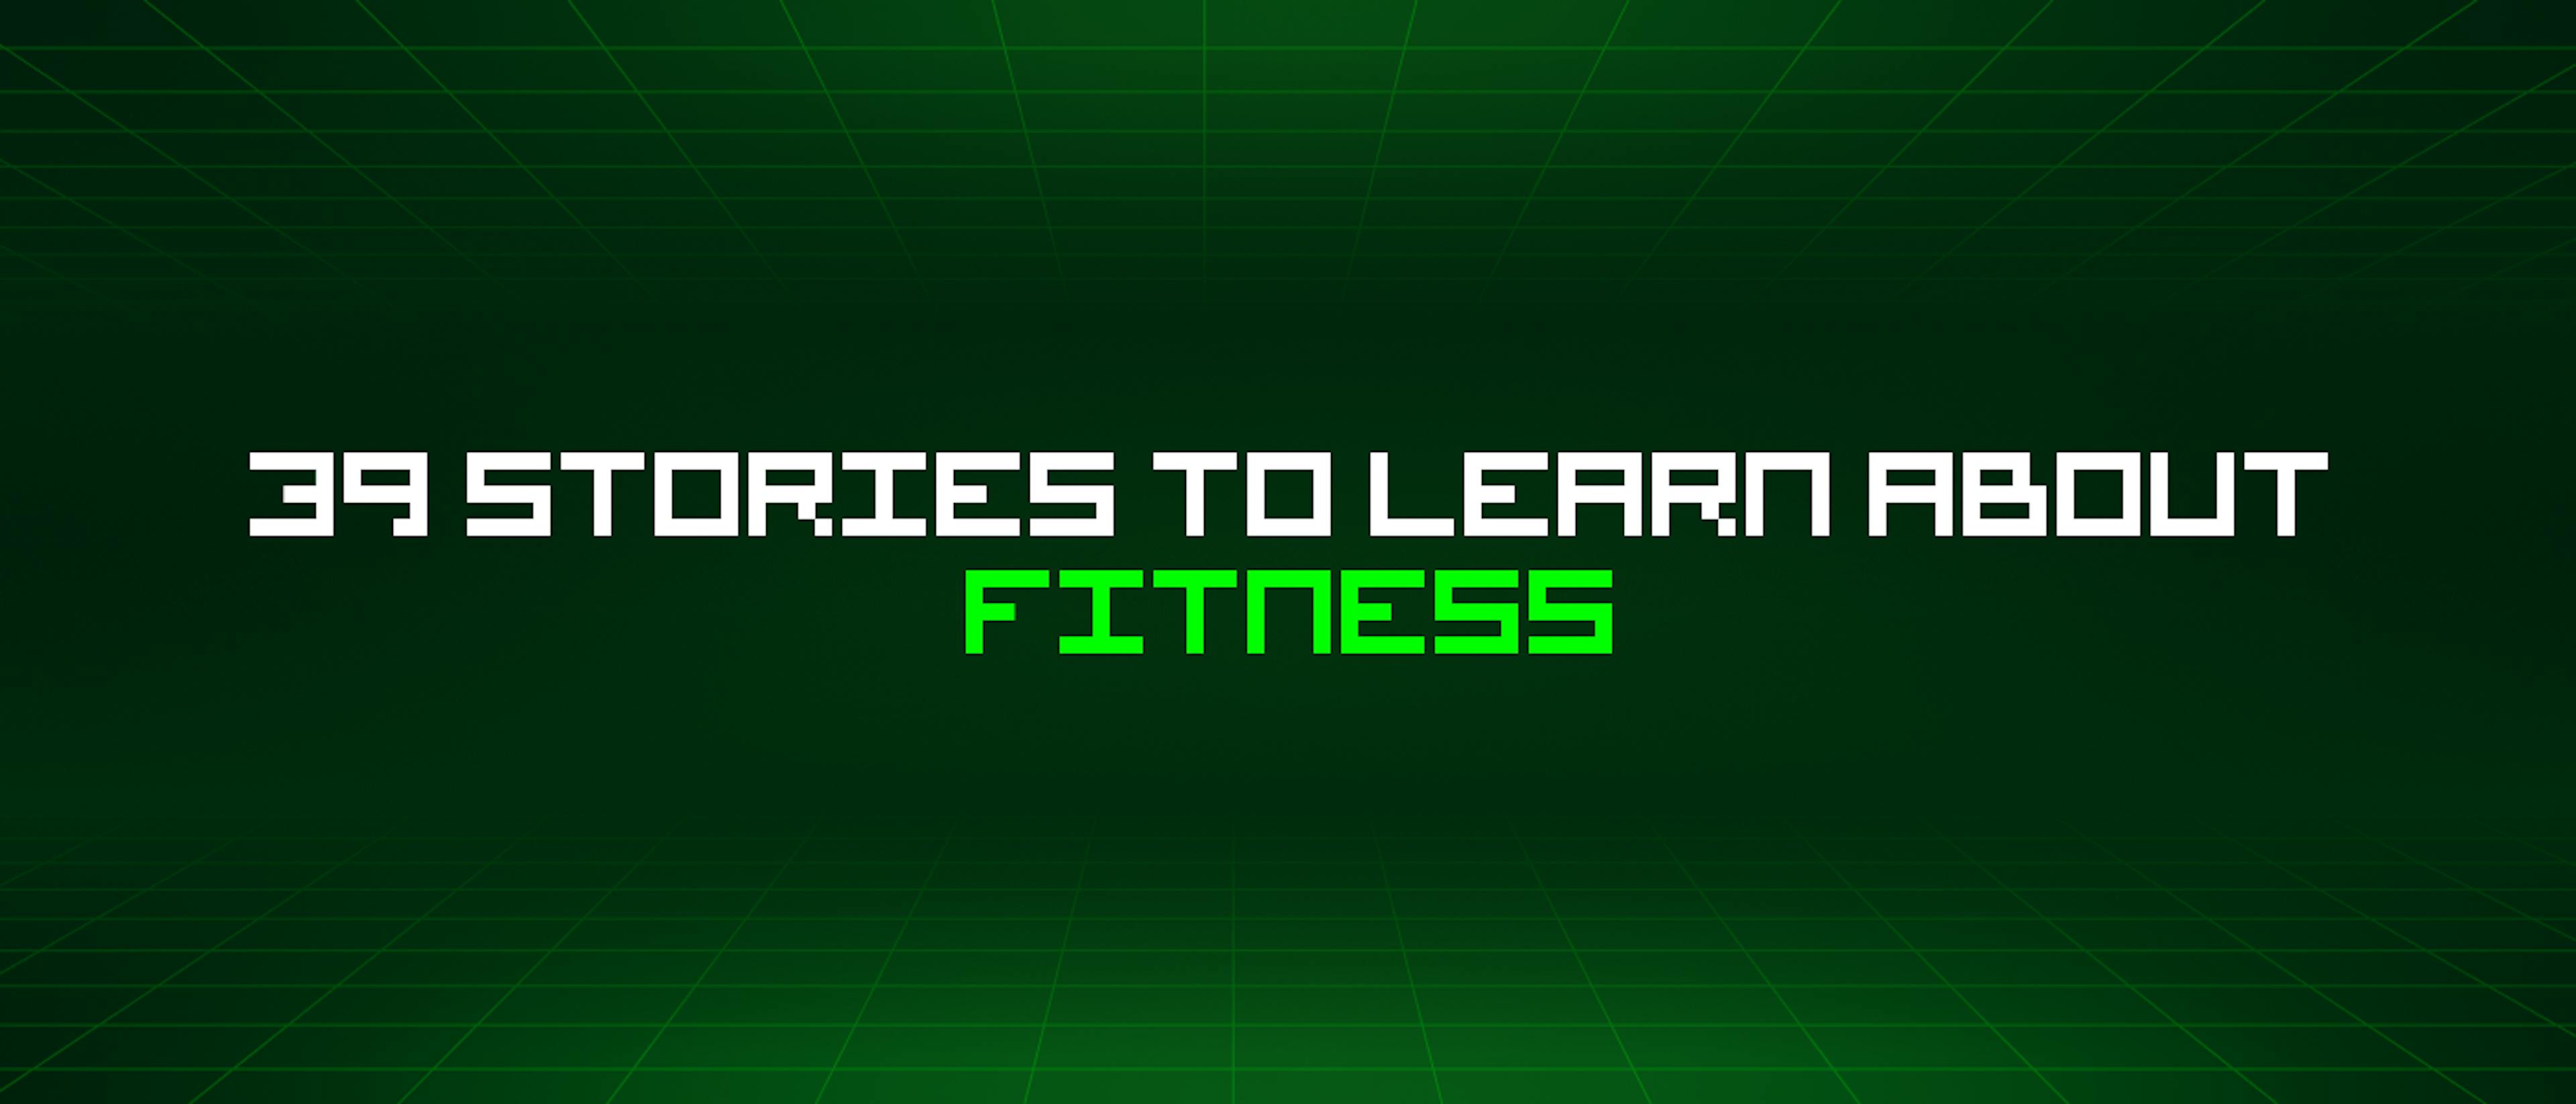 featured image - 39 Stories To Learn About Fitness